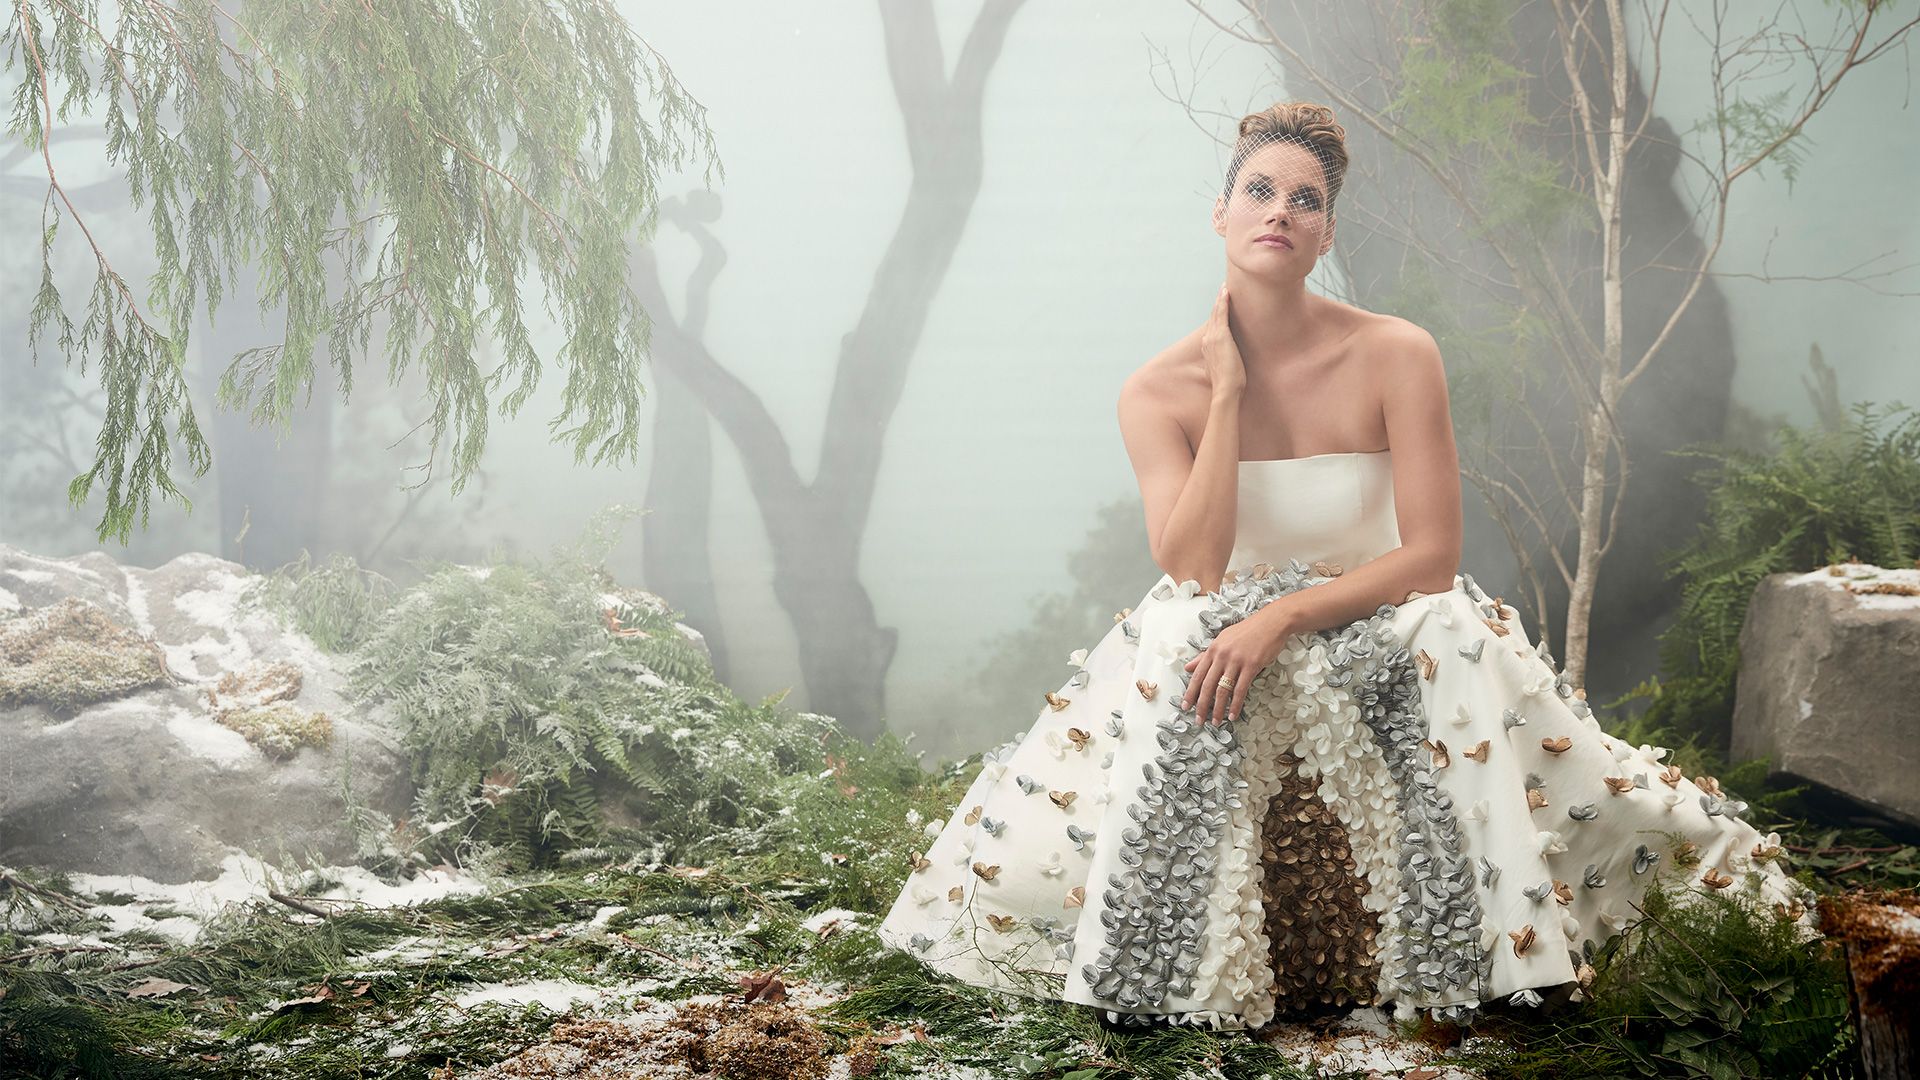 First Look: Exclusive Fashion Photo Shoot With Missy Peregrym Of FBI